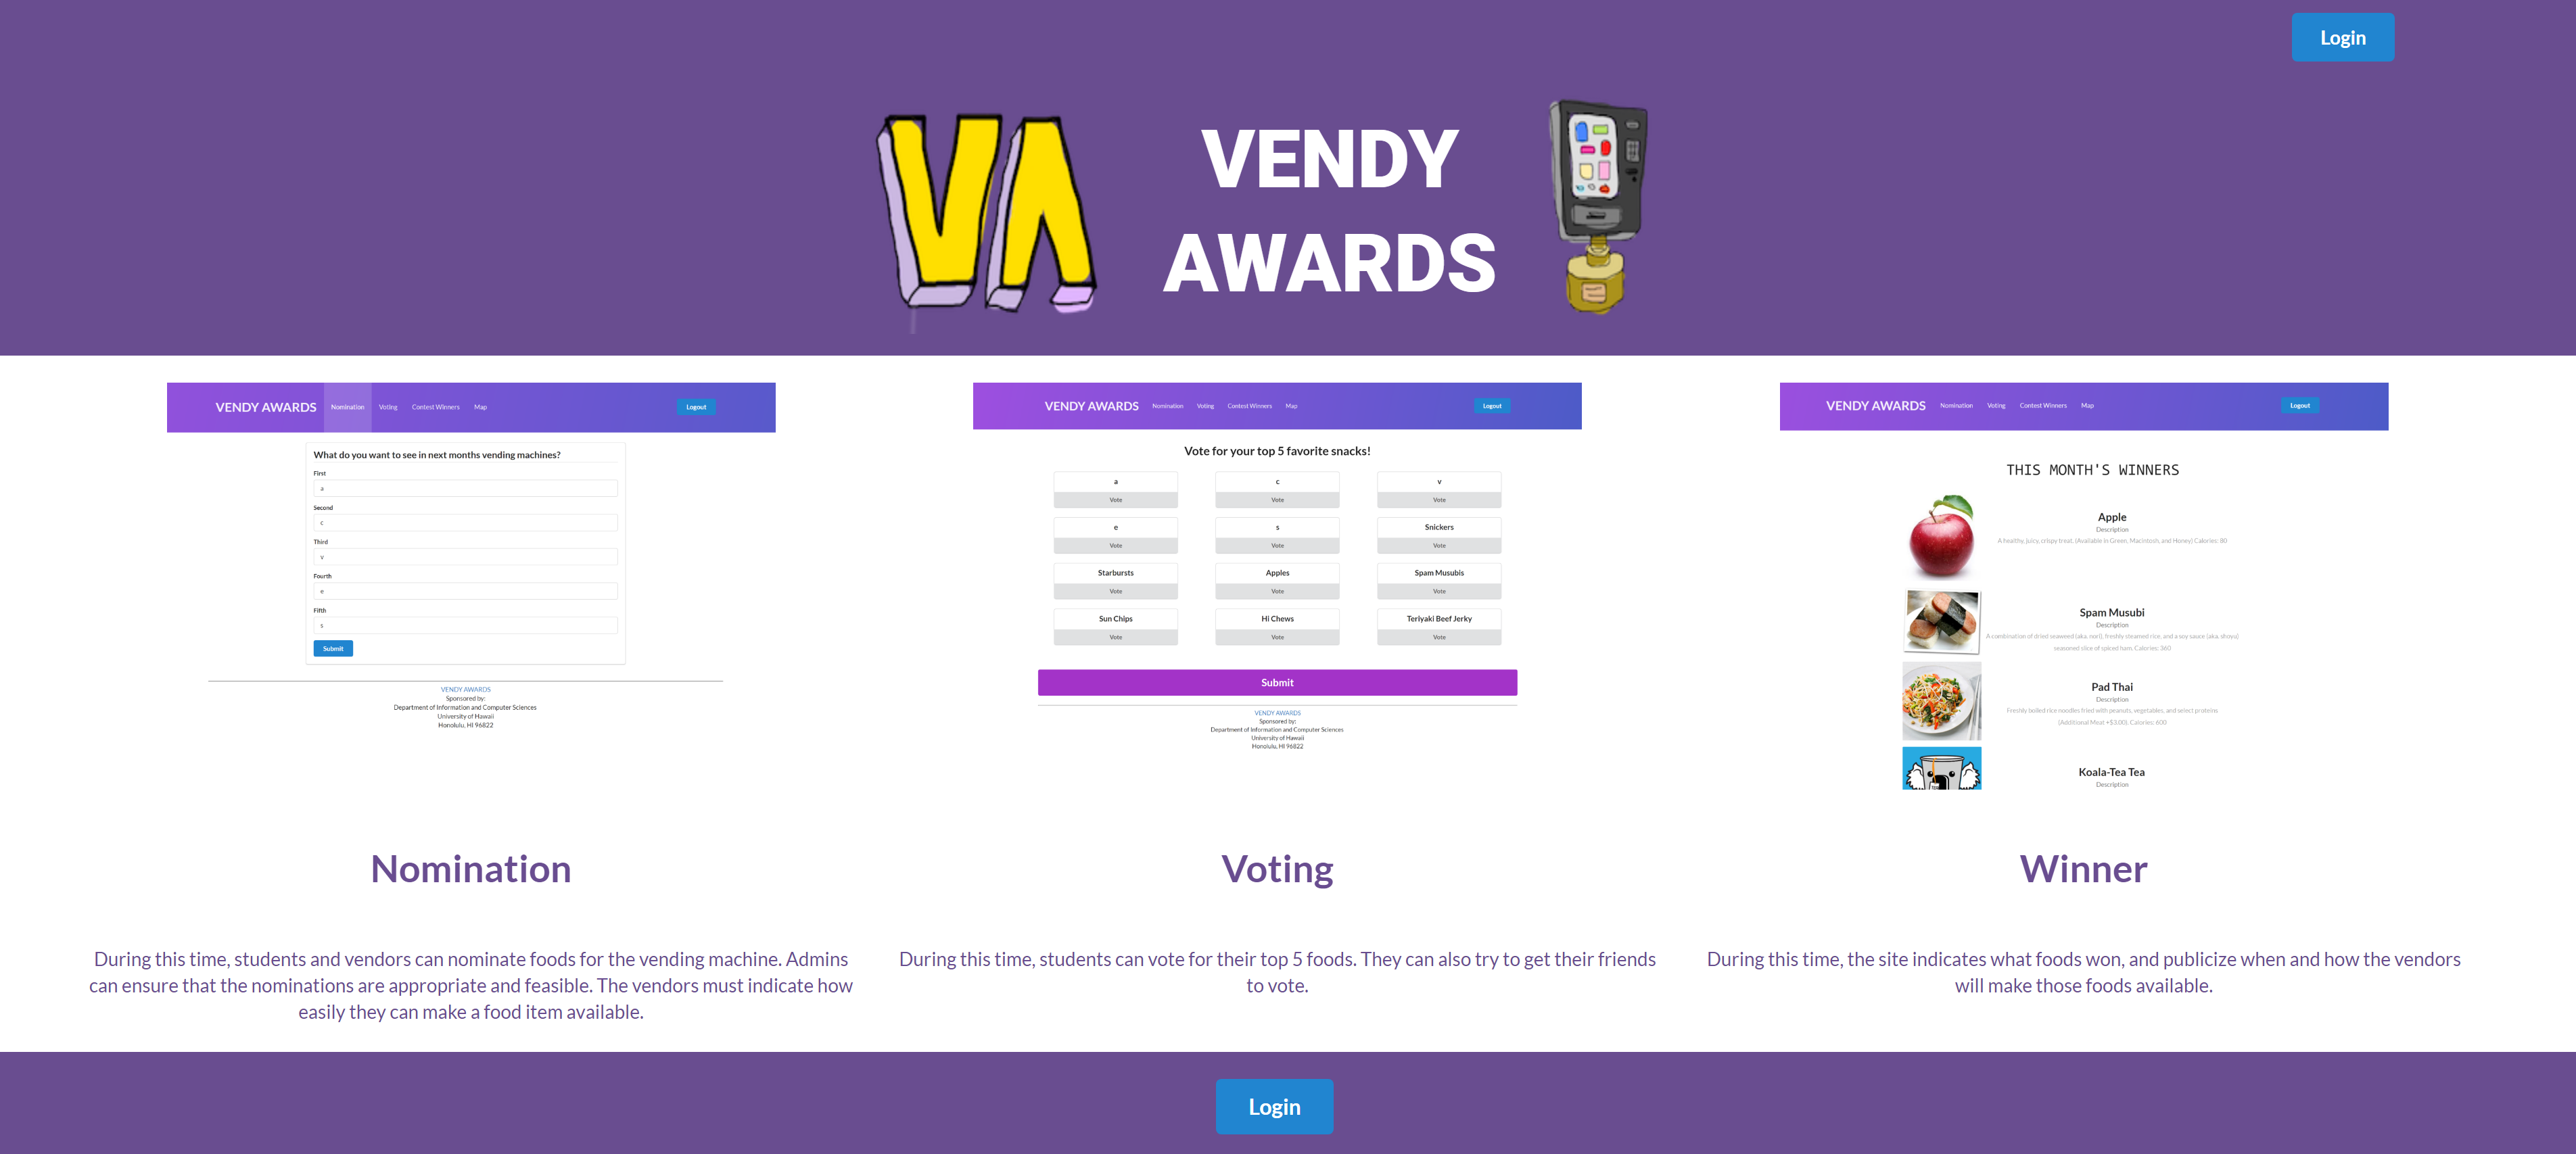 Vendy Awards Voting system for UH vending machines